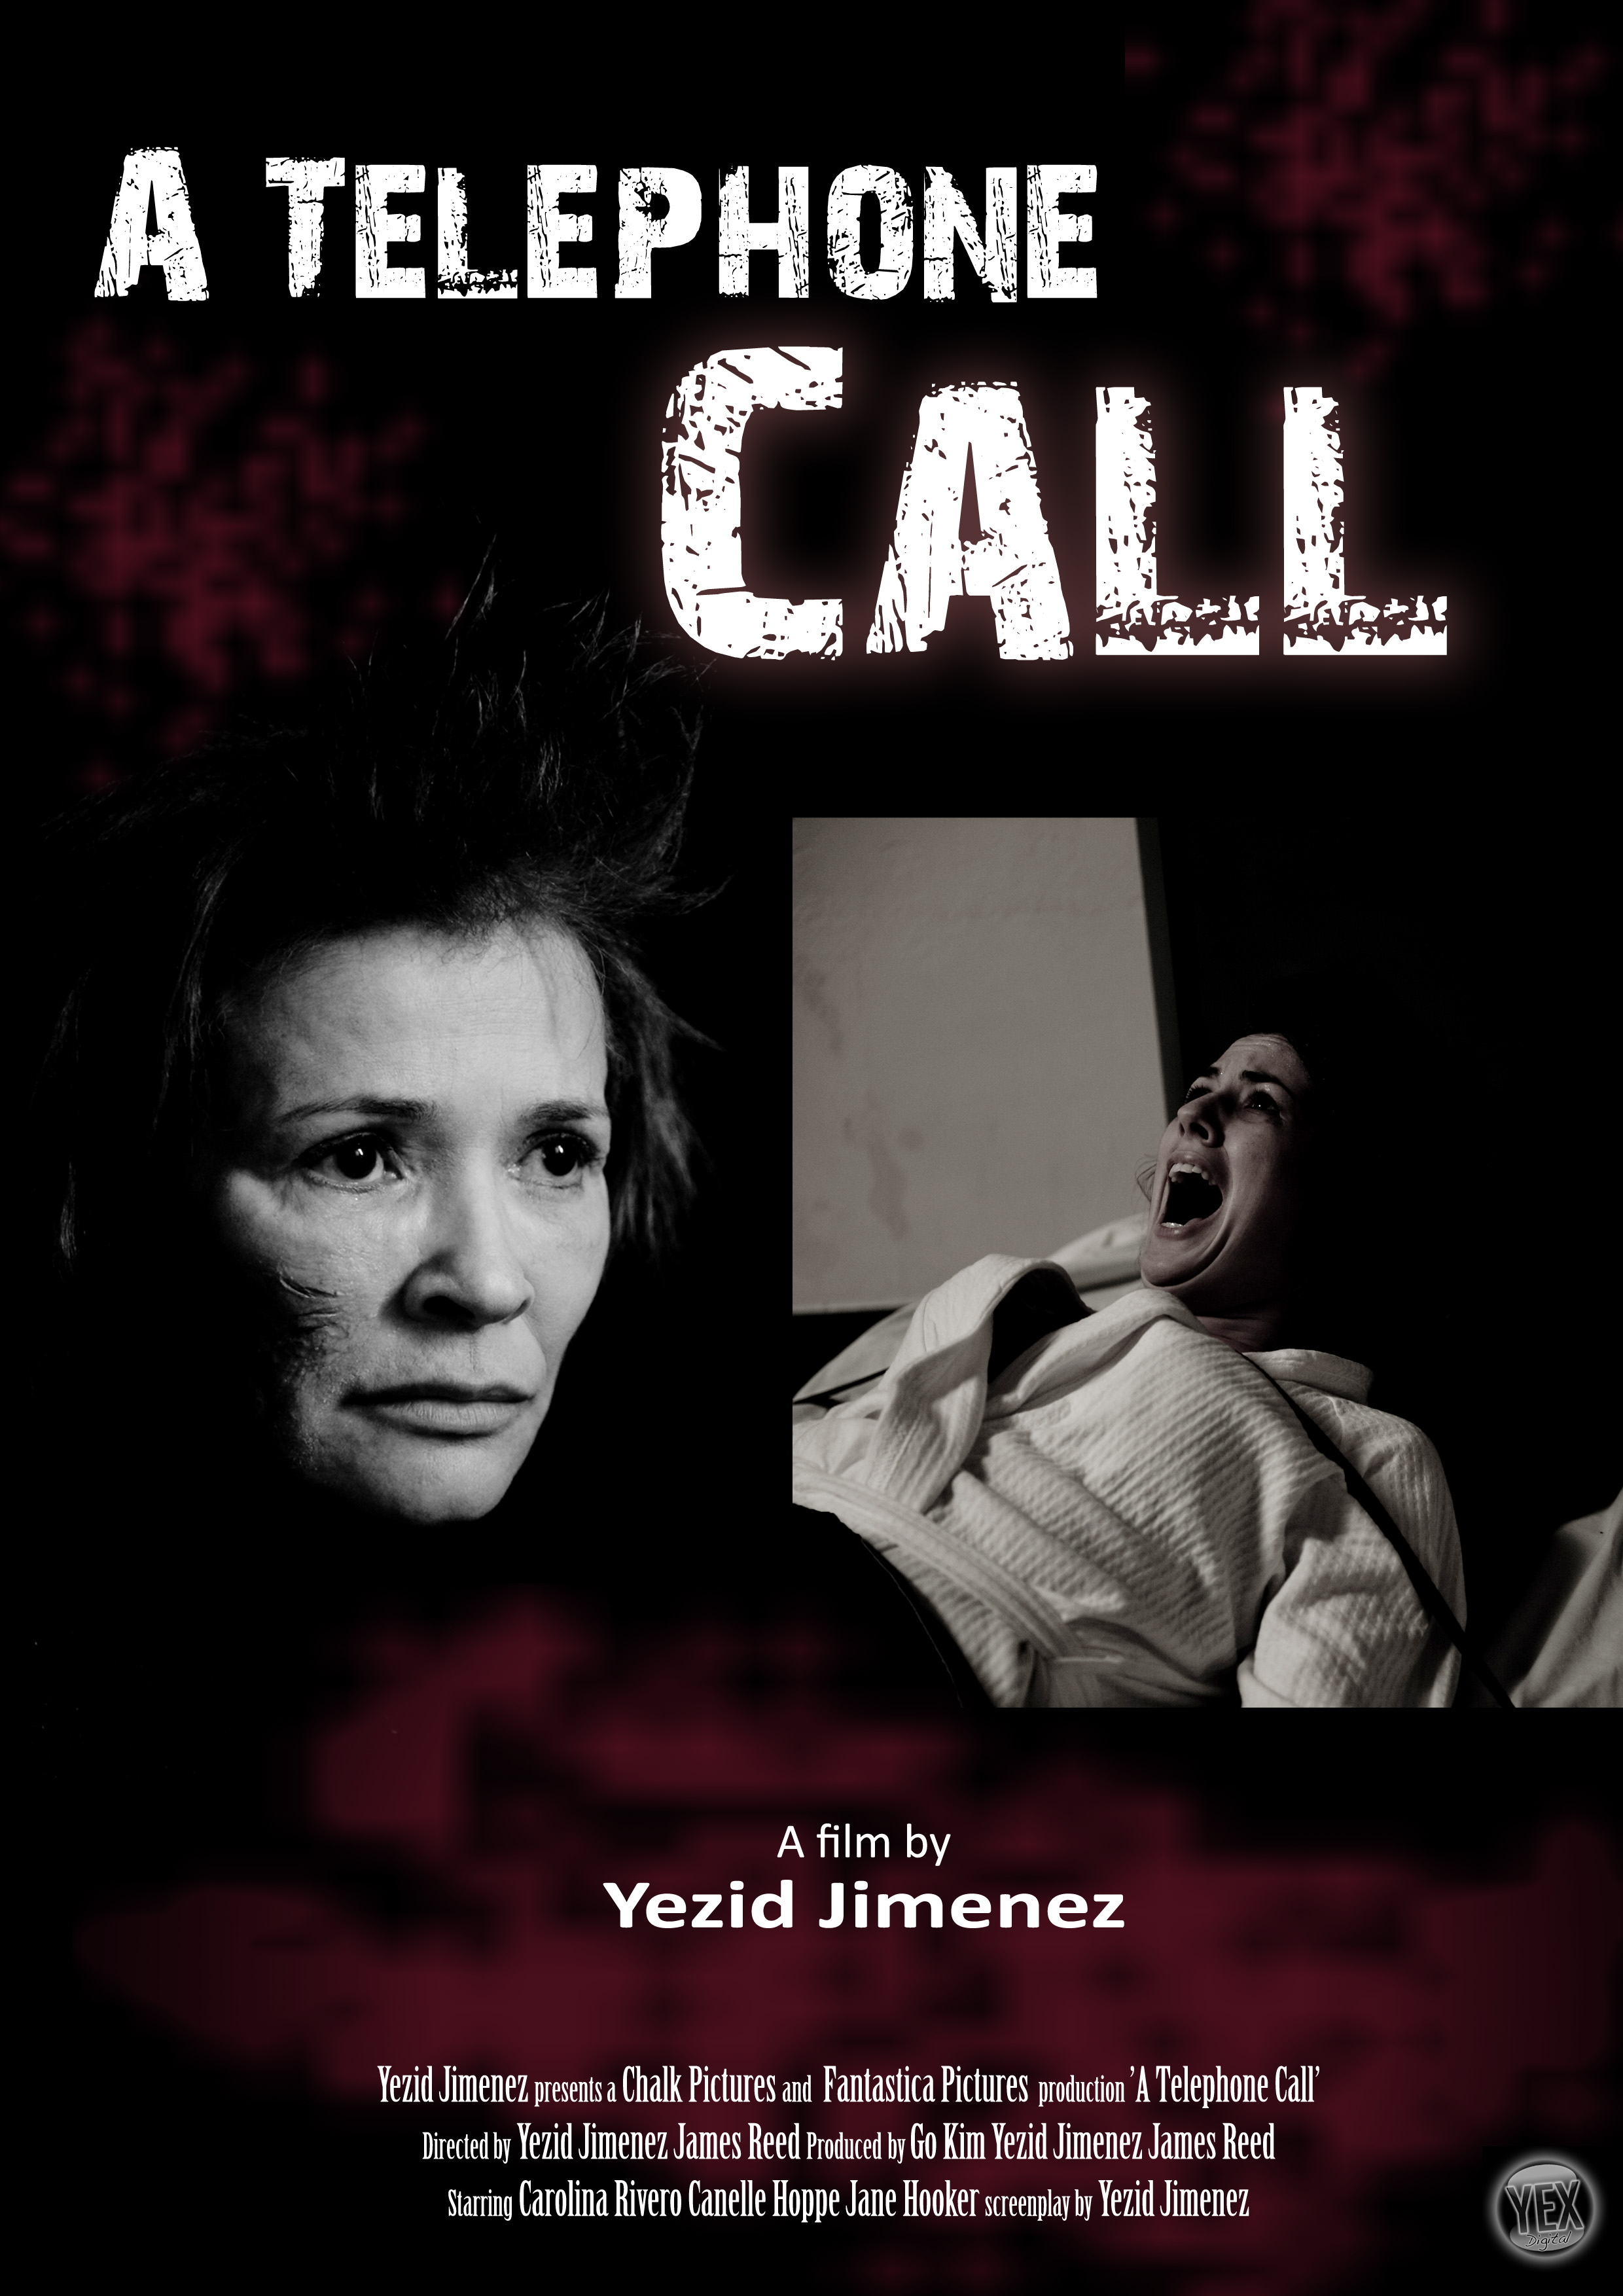 Poster of film 'A Telephone Call' Directed by Y.Jimenez